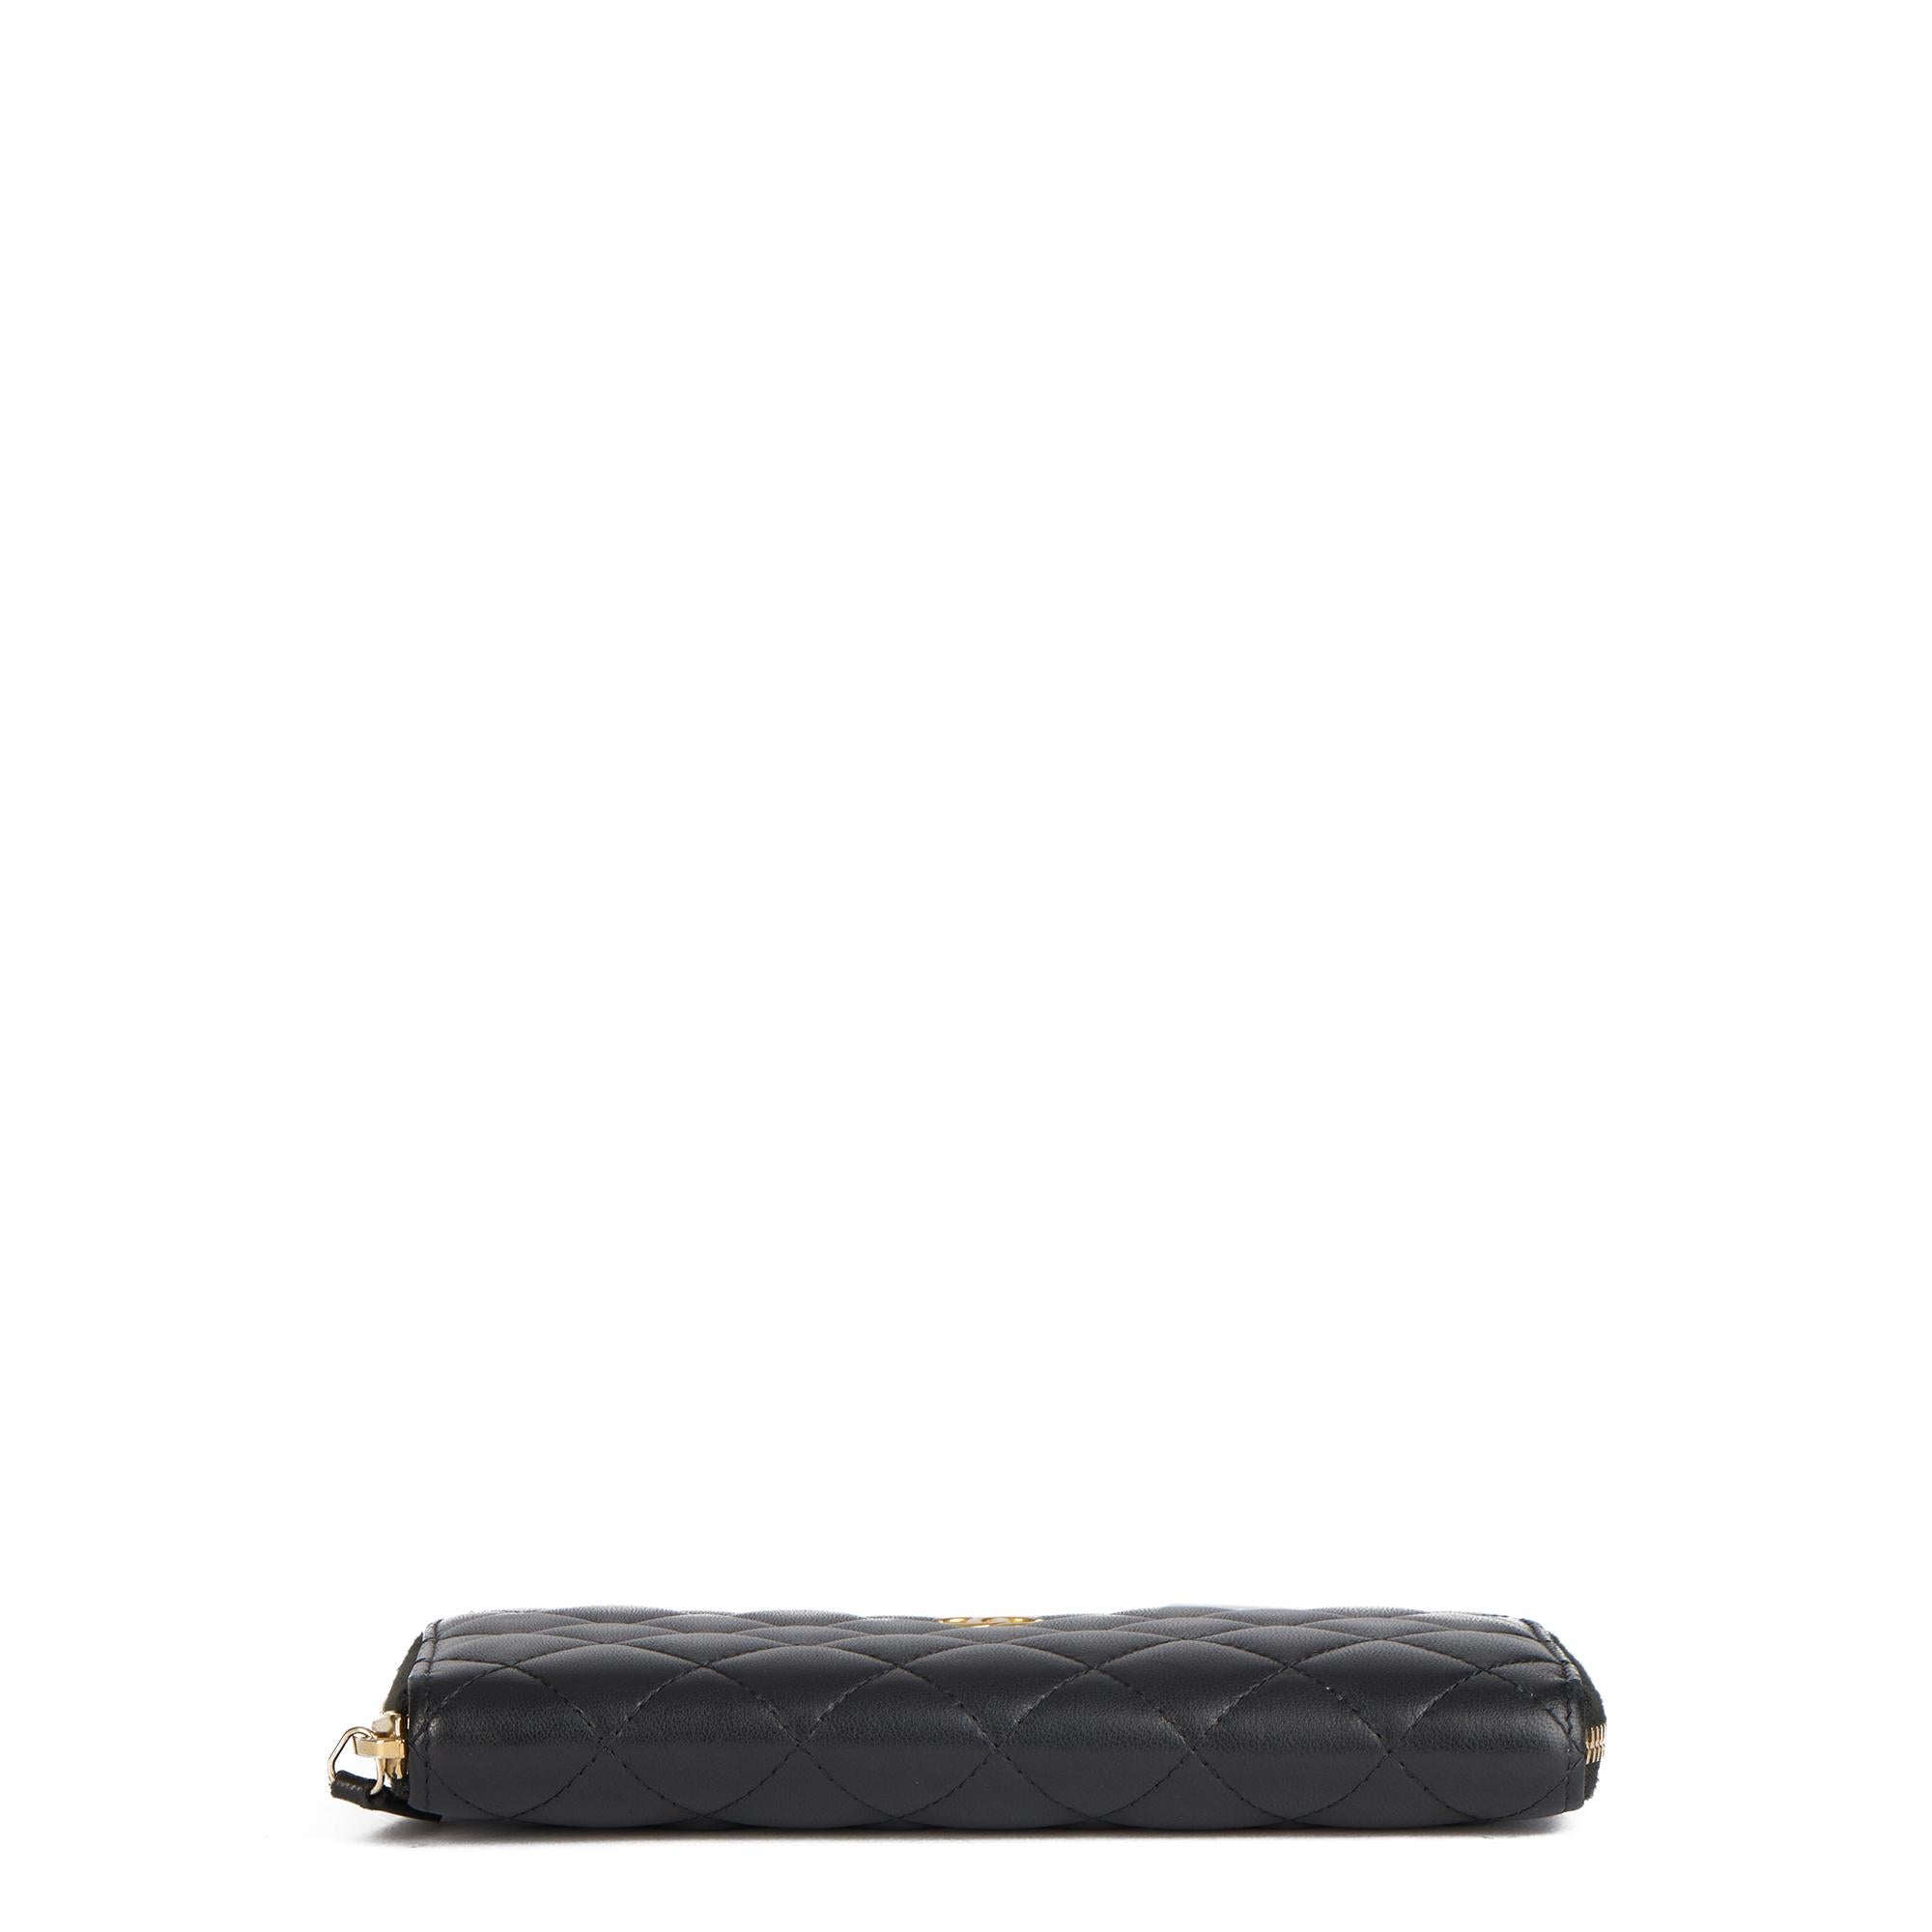 2019 Chanel Black Quilted Lambskin Classic Long Zipped Wallet 1